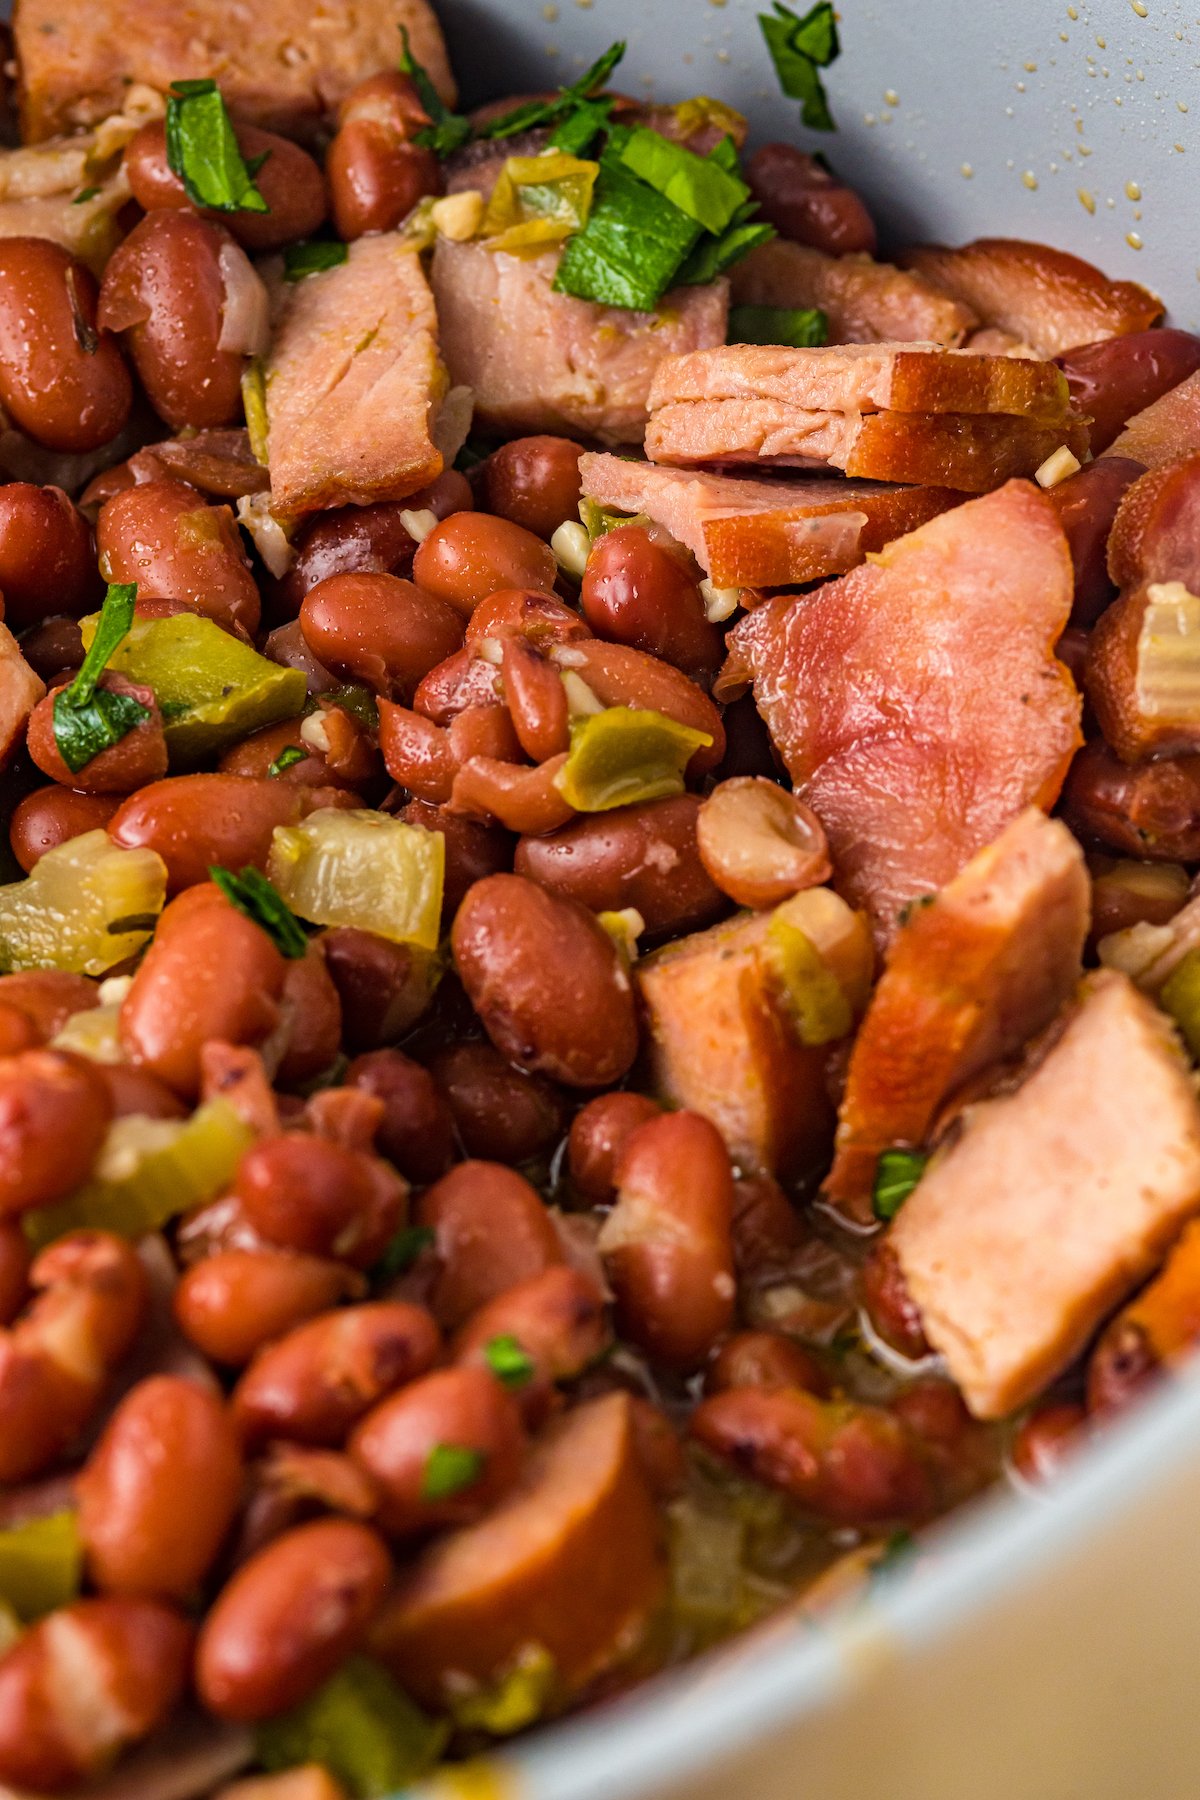 Cooked red beans with ham, vegetables, and sausage.